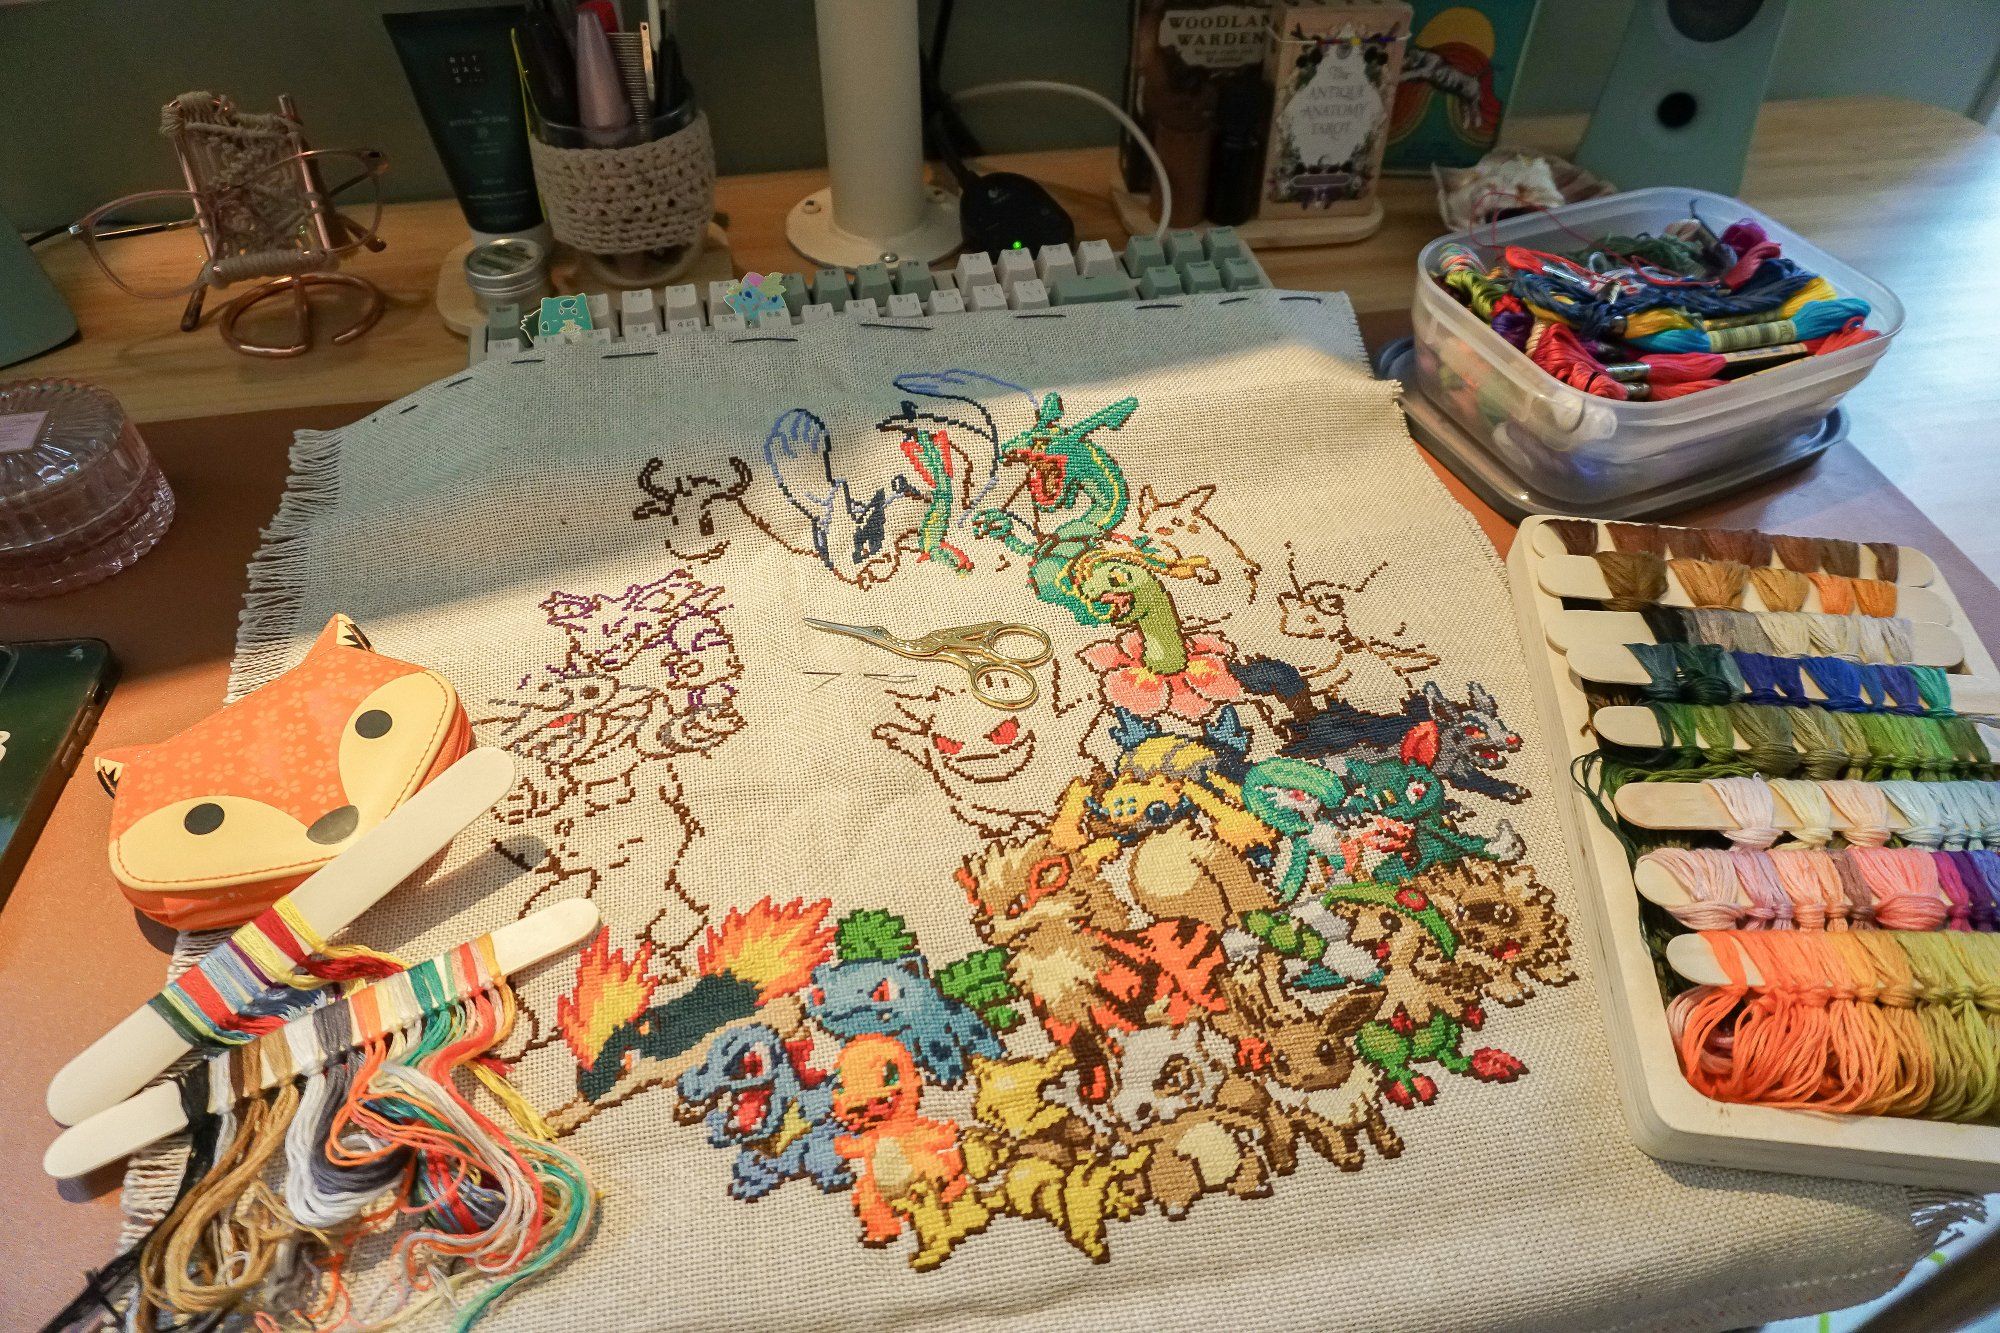 A piece of fabric with a started cross-stitching of Pokémon creatures and multicoloured threads lying on the desk